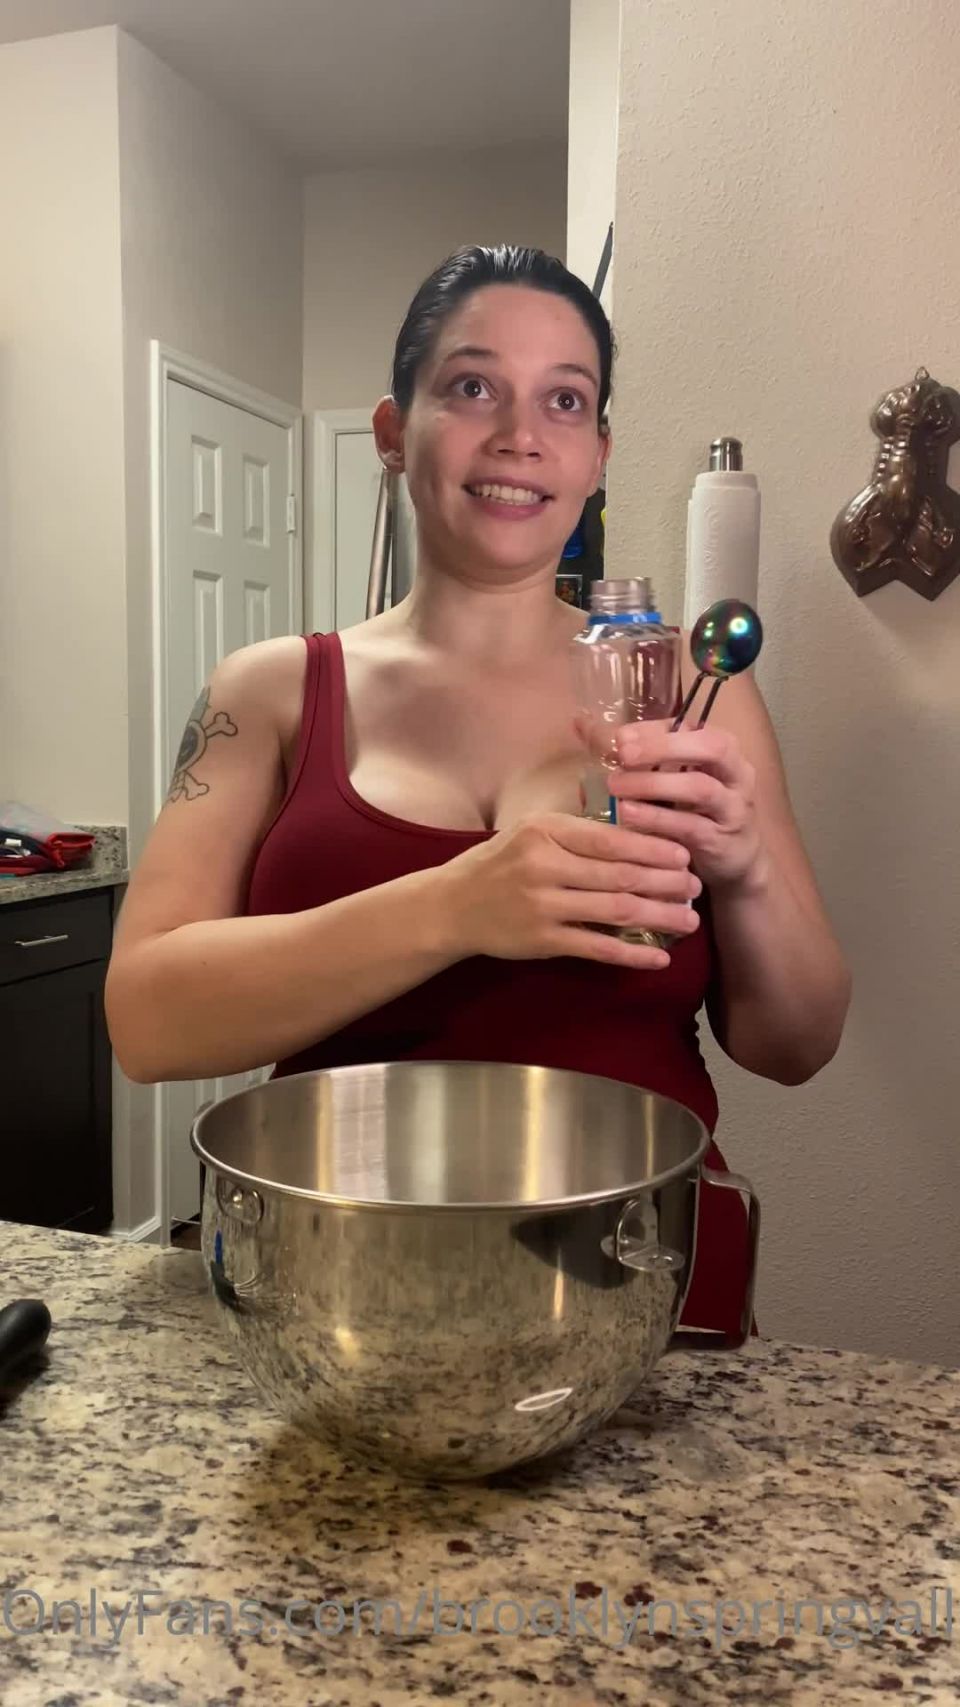 Brooklynspringvalley () - what about topless cooking videos or naked apron baking lemme know today i tried making 15-02-2021